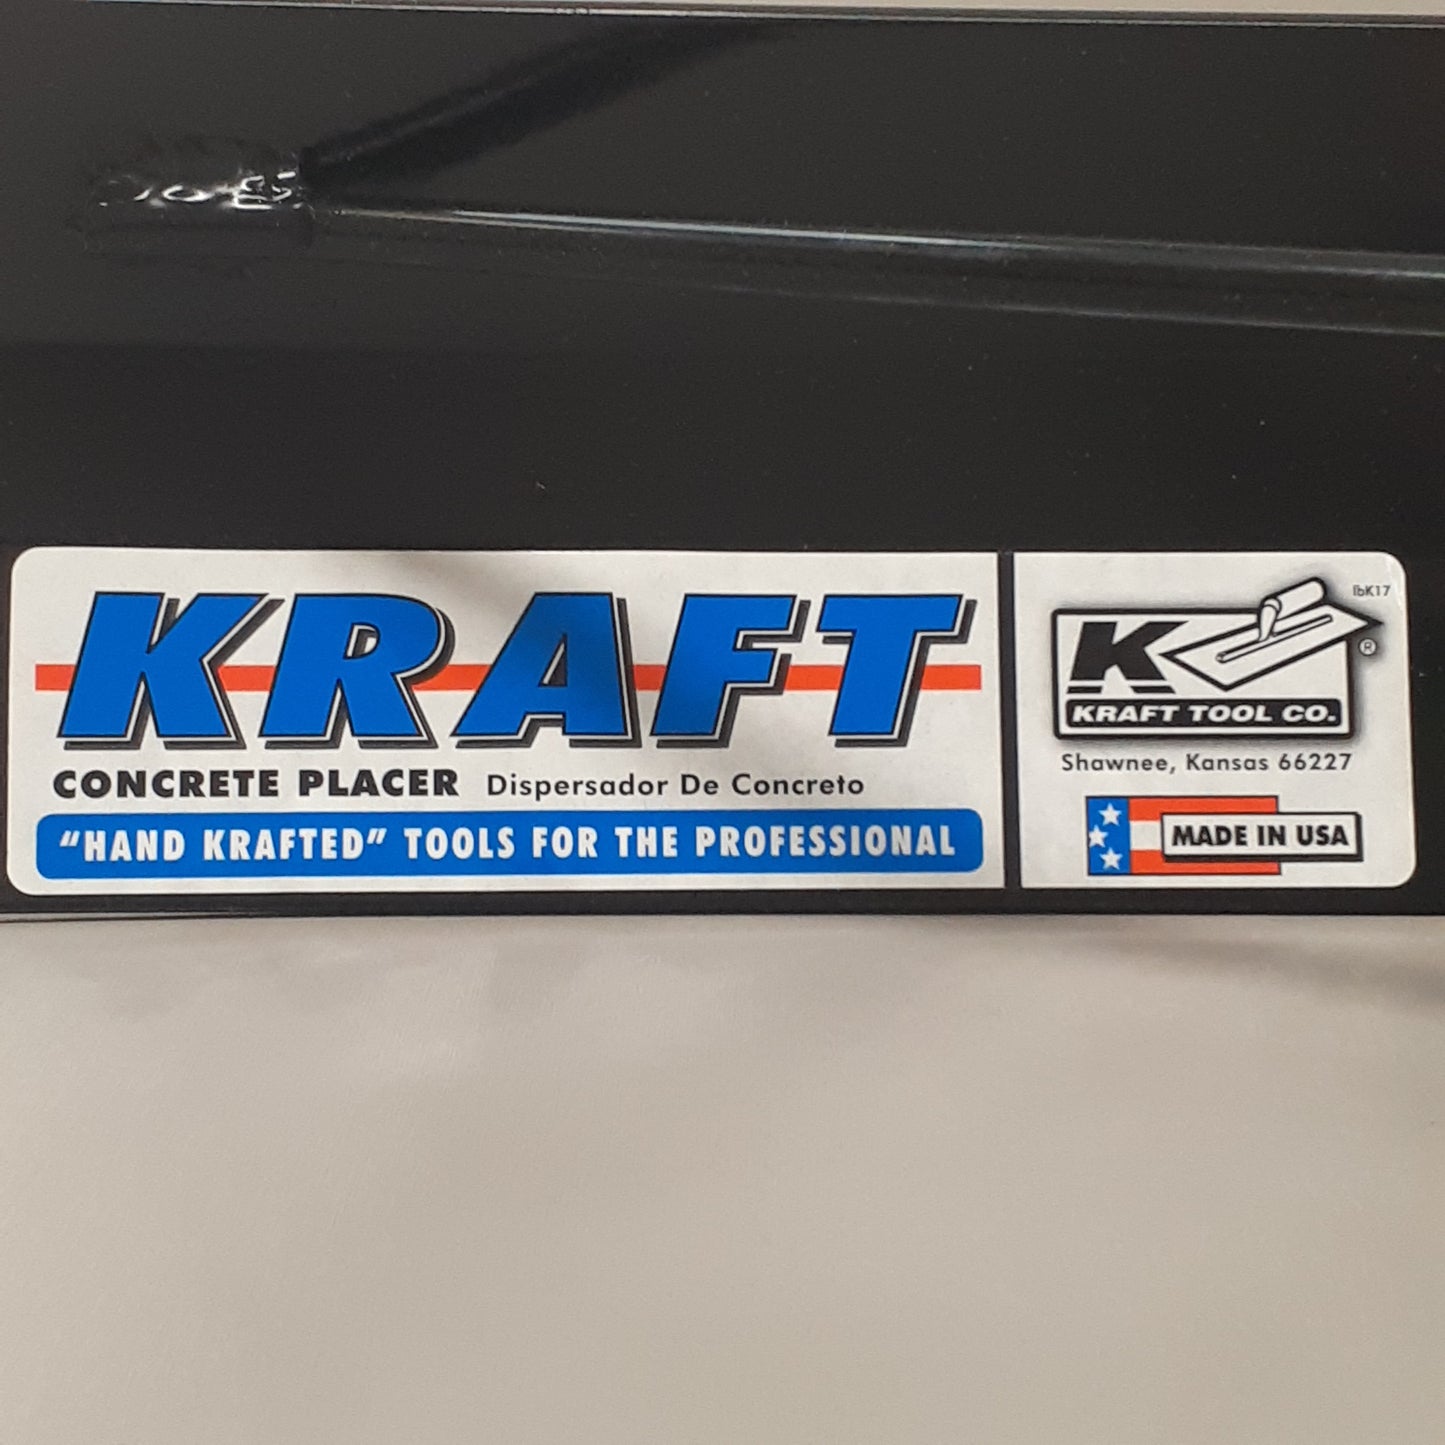 KRAFT TOOL CO. 19.5" x 4" Lightweight Aluminum Concrete Spreader with Hook with Handle (New)